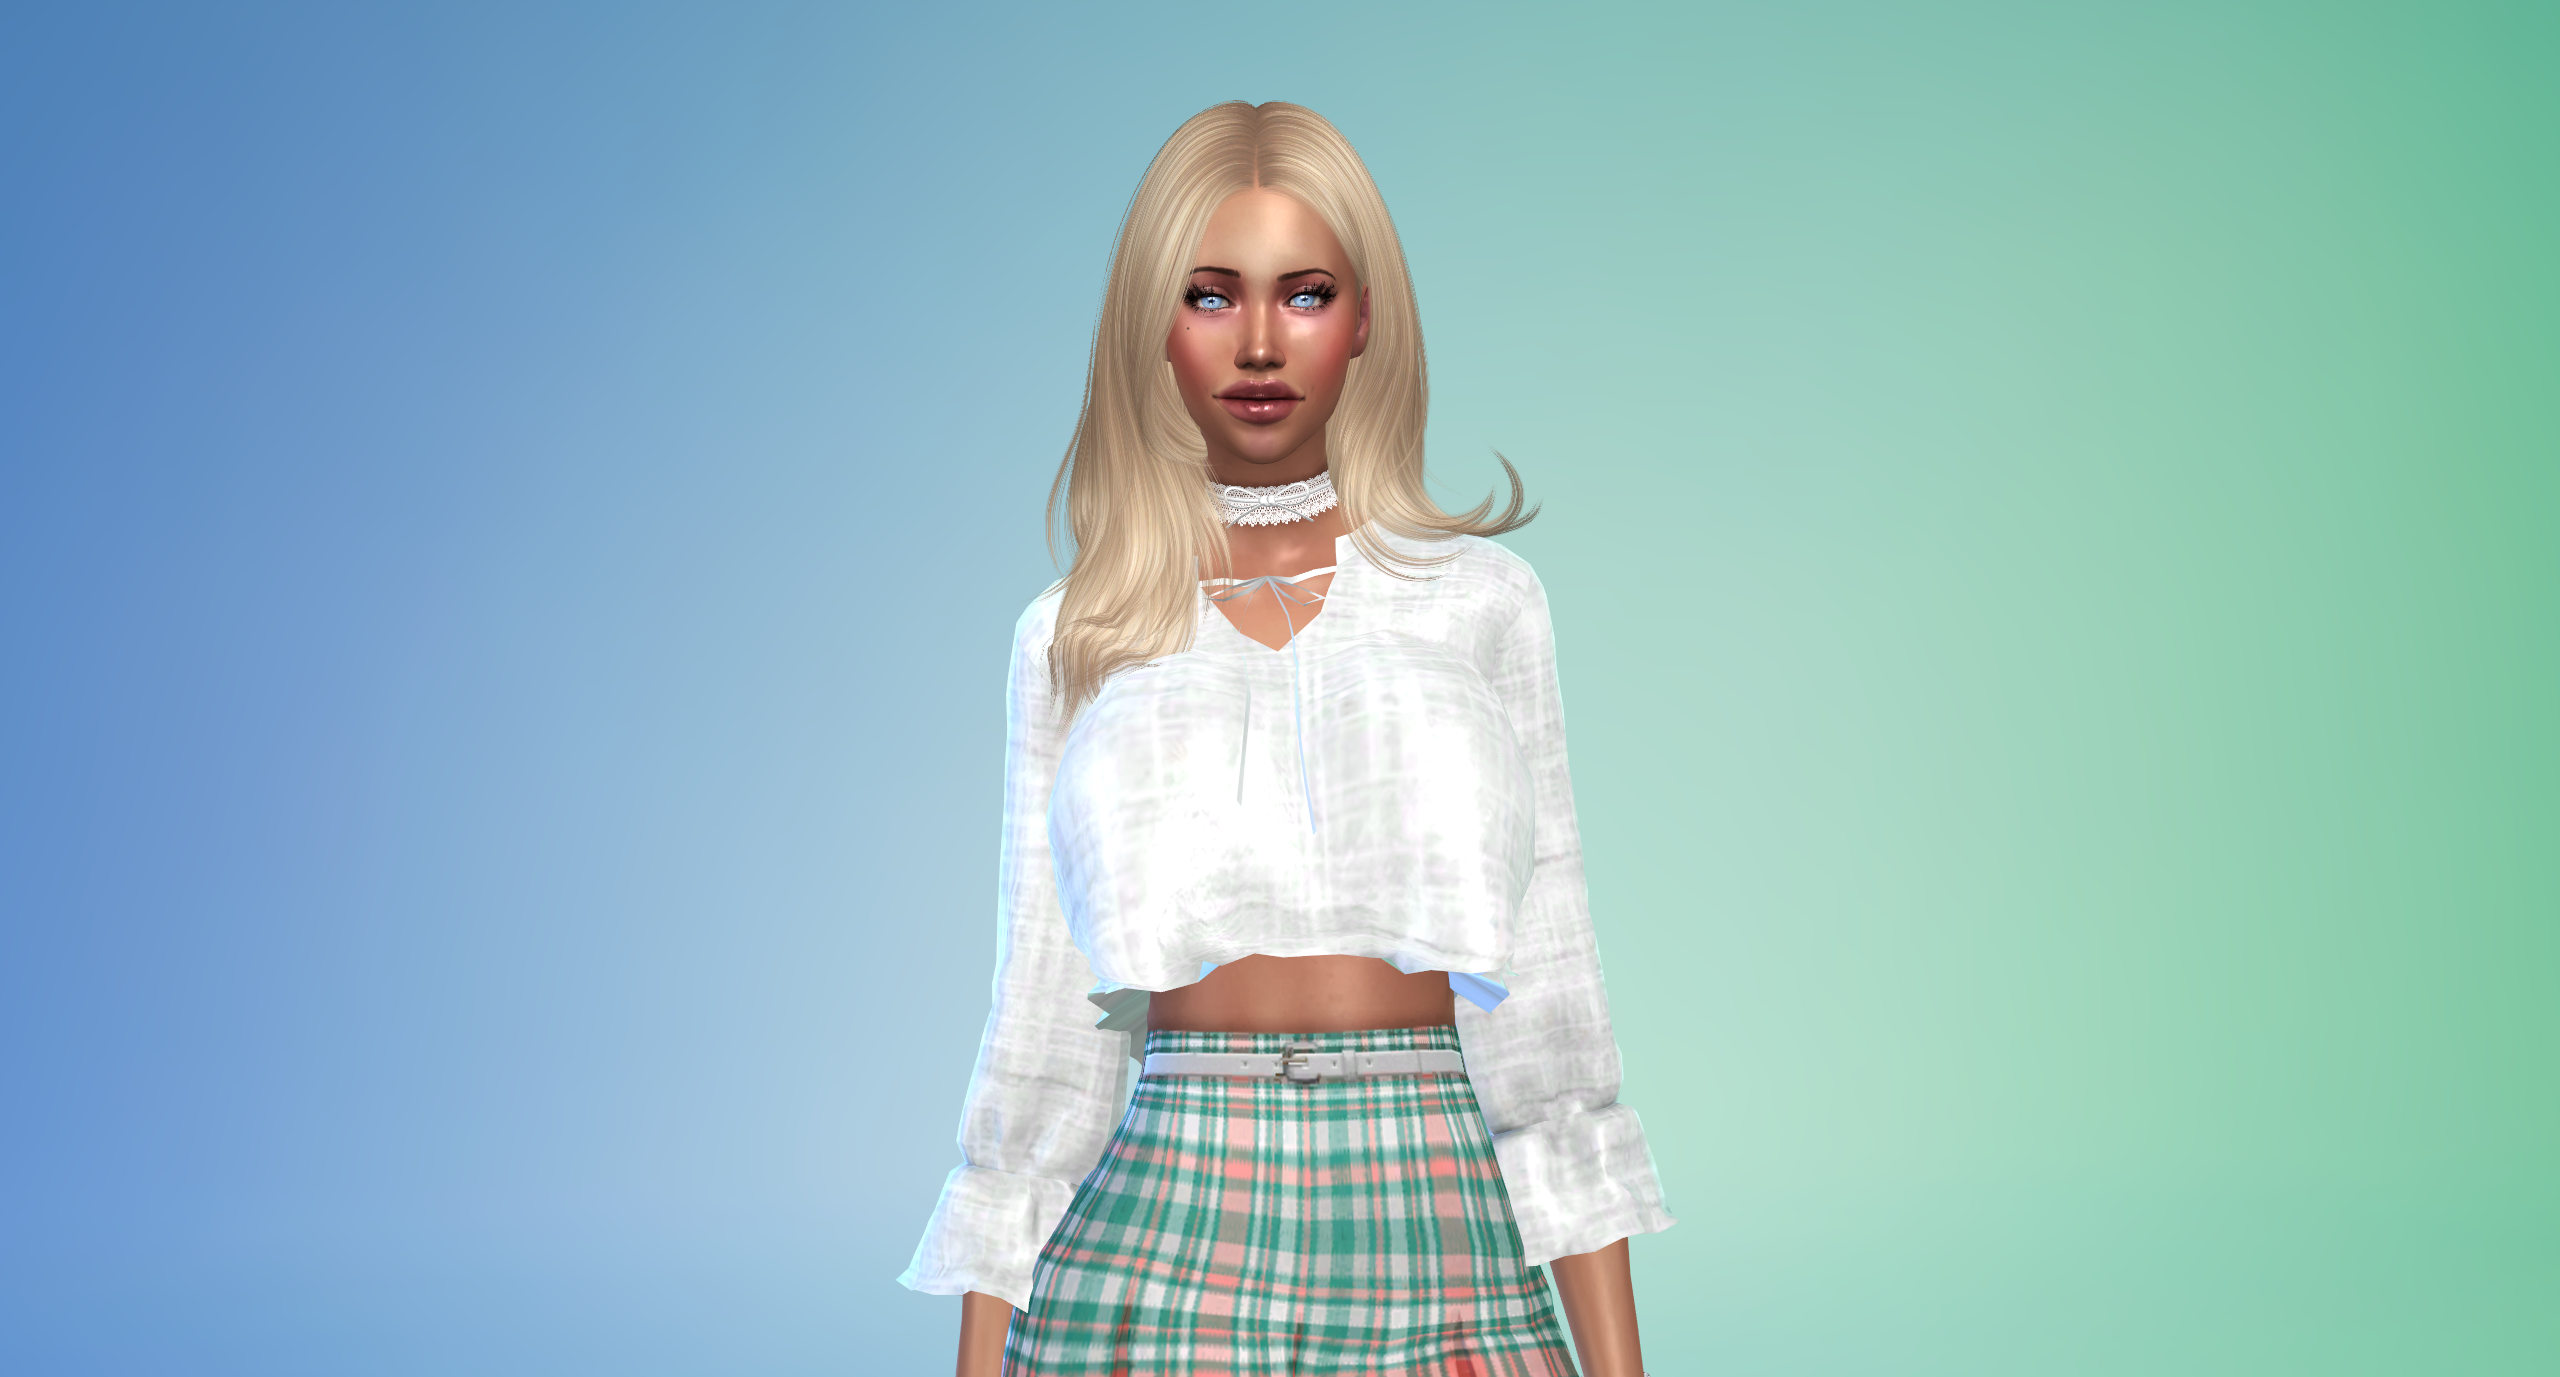 Share Your Female Sims! - Page 94 - The Sims 4 General Discussion ...